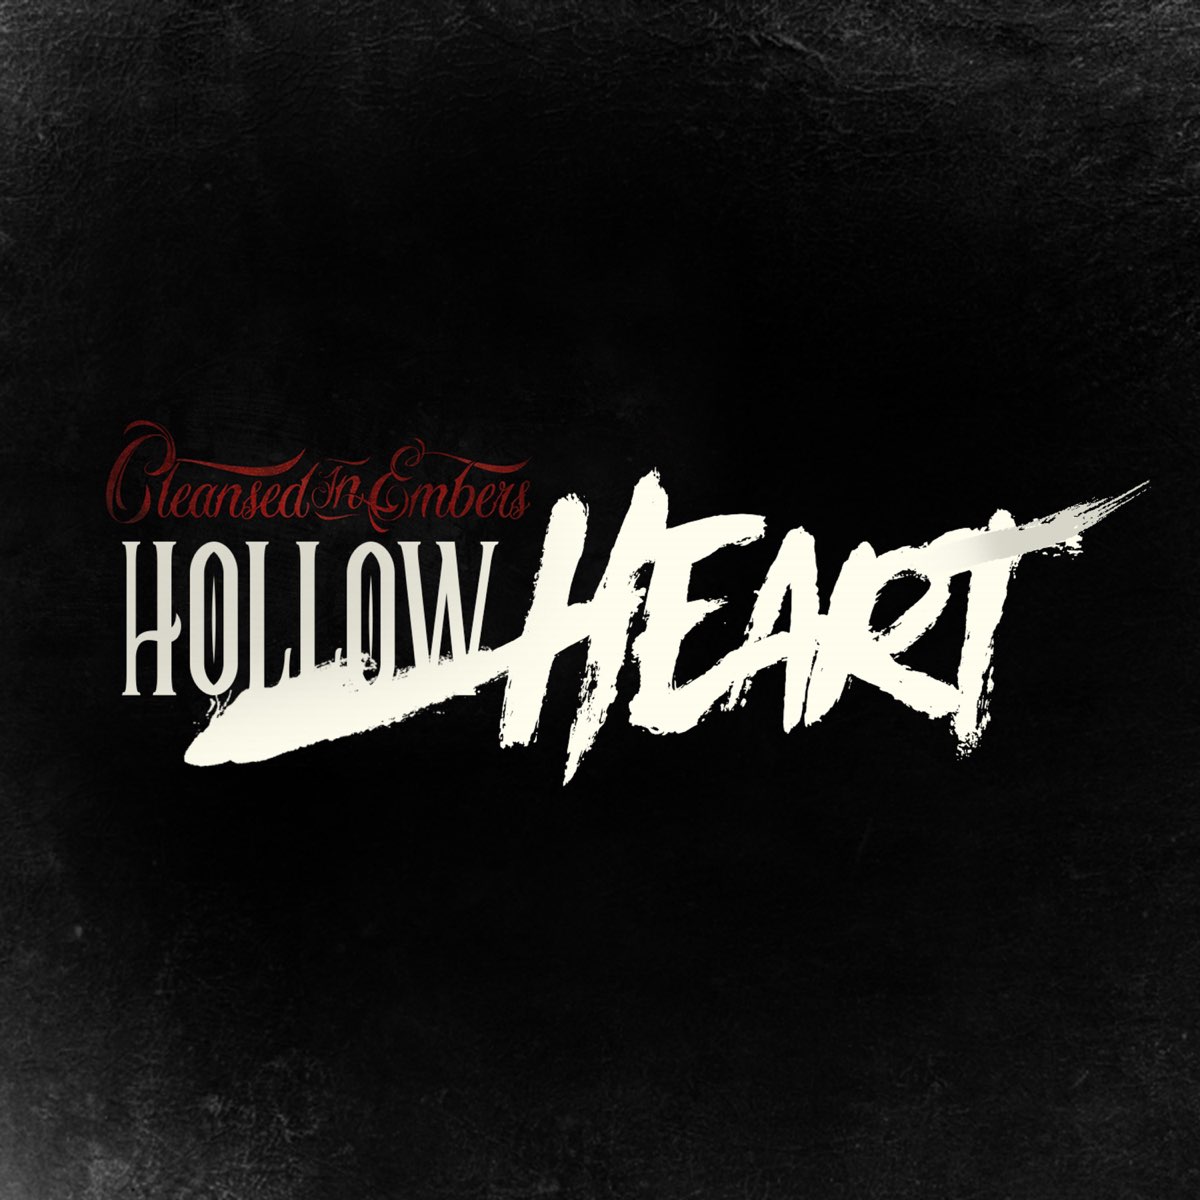 ‎Hollow Heart - Single by Cleansed in Embers on Apple Music